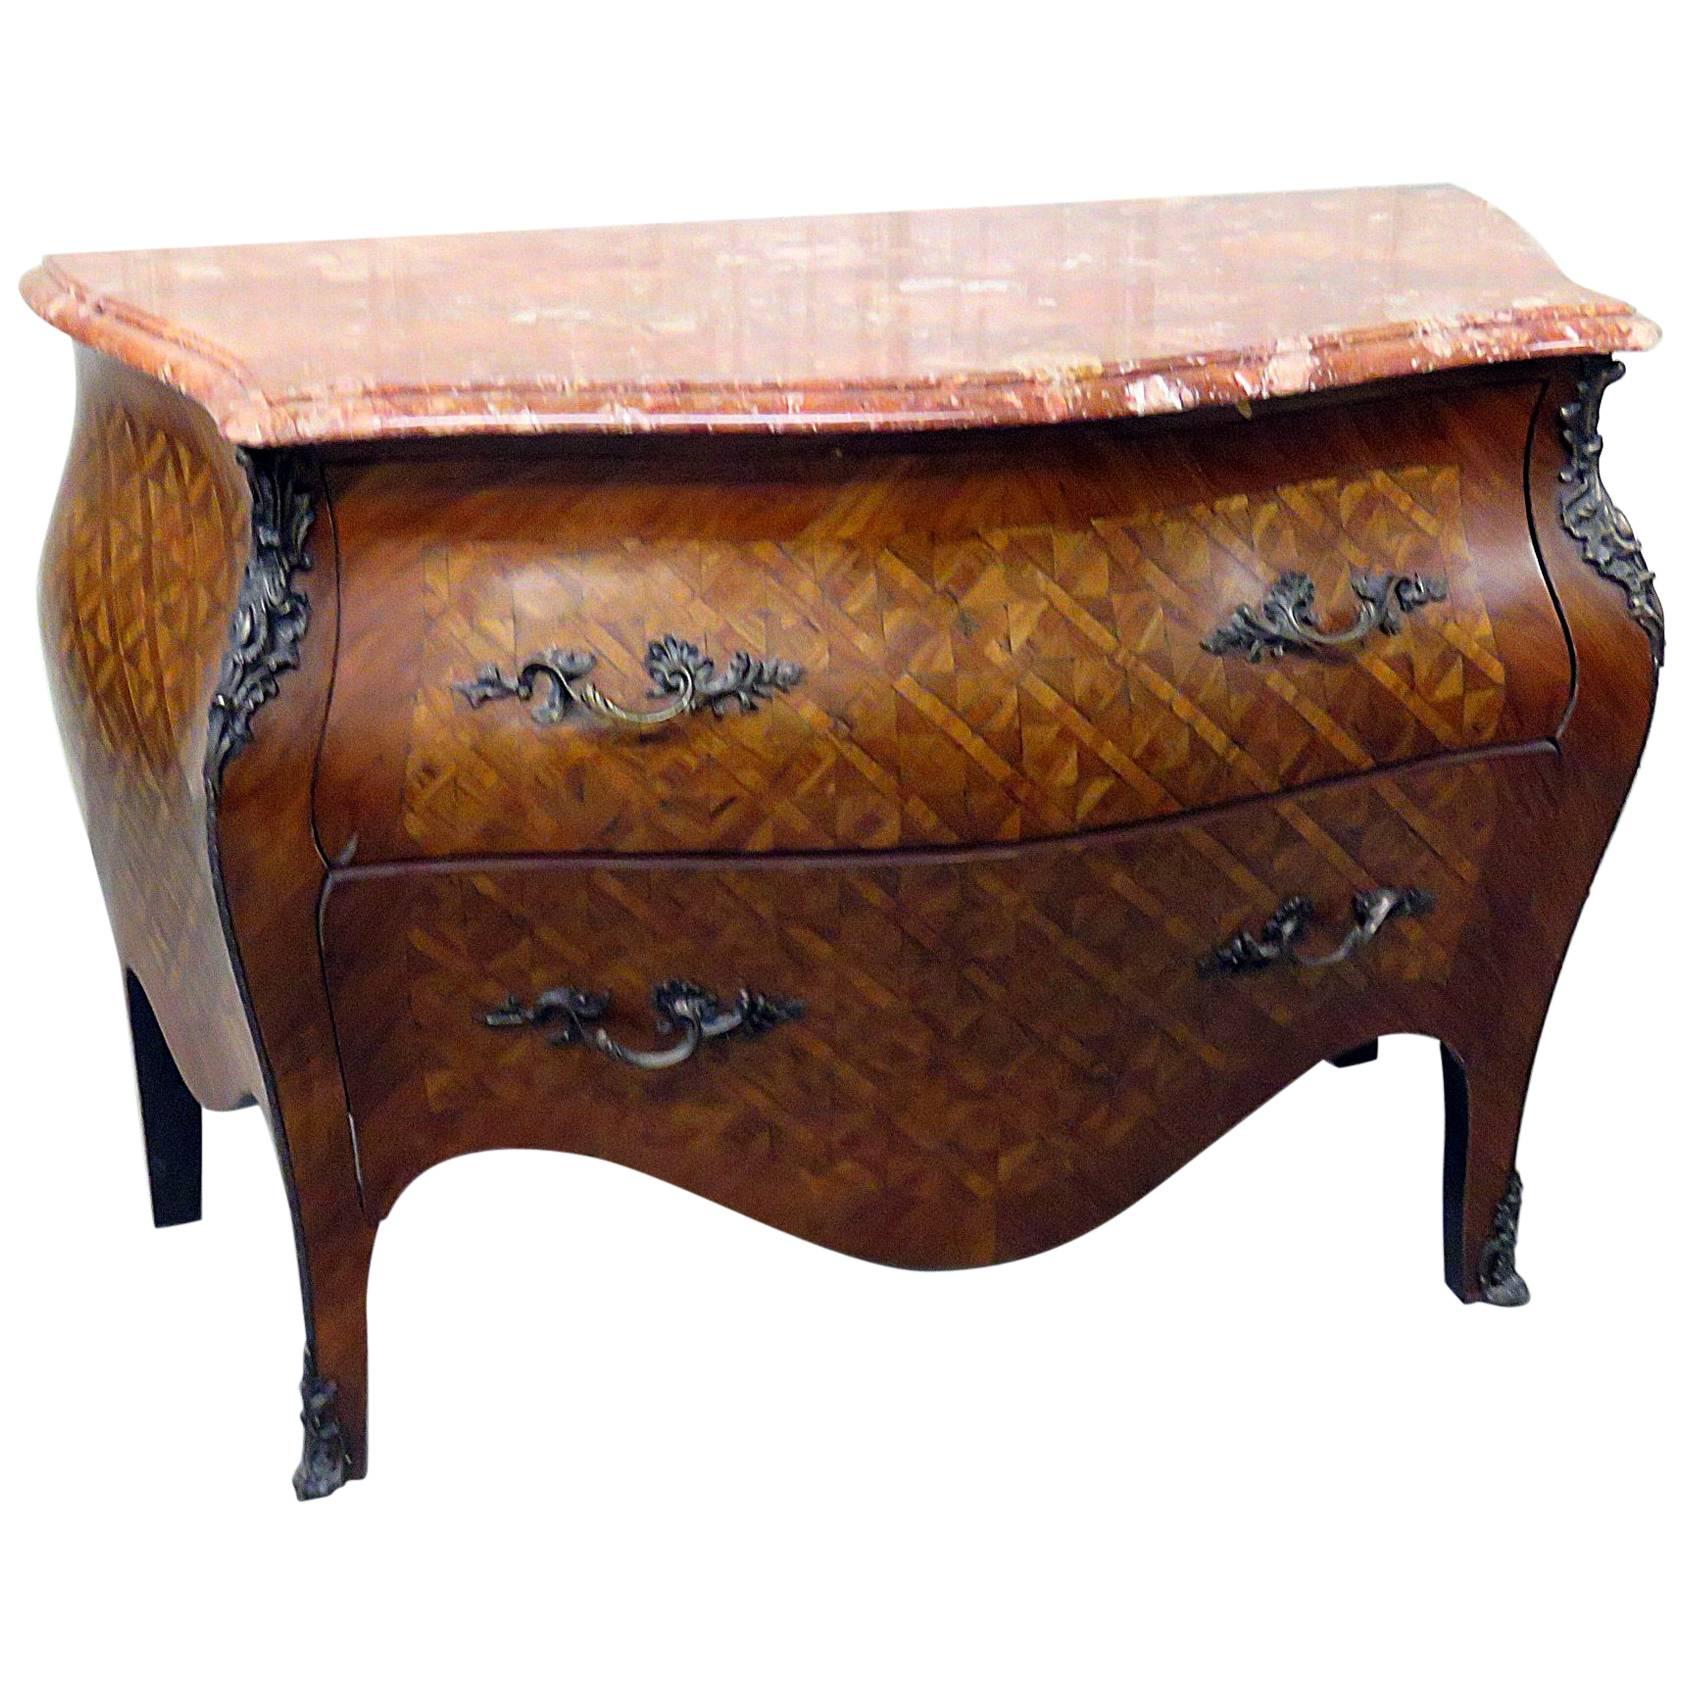 Inlaid Kingwood French Louis XV Style Marble Top Marquetry Commode Dresser